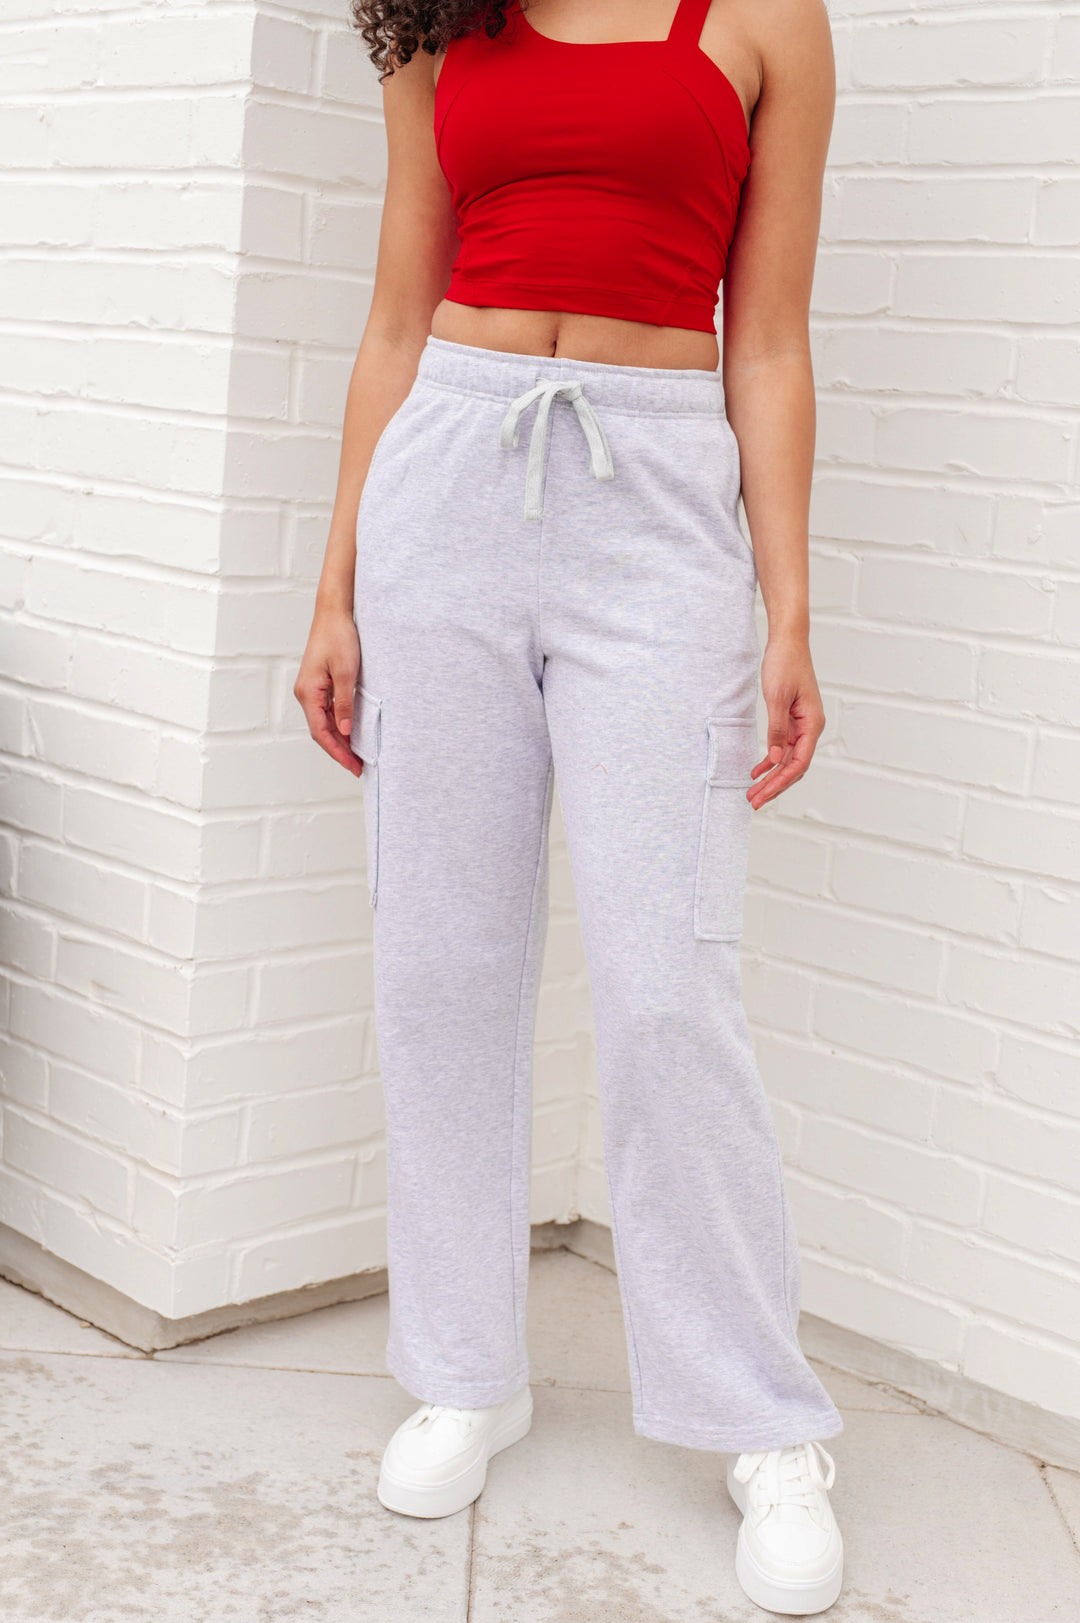 Run, Don't Walk Cargo Sweatpants in Grey-Pants-Inspired by Justeen-Women's Clothing Boutique in Chicago, Illinois